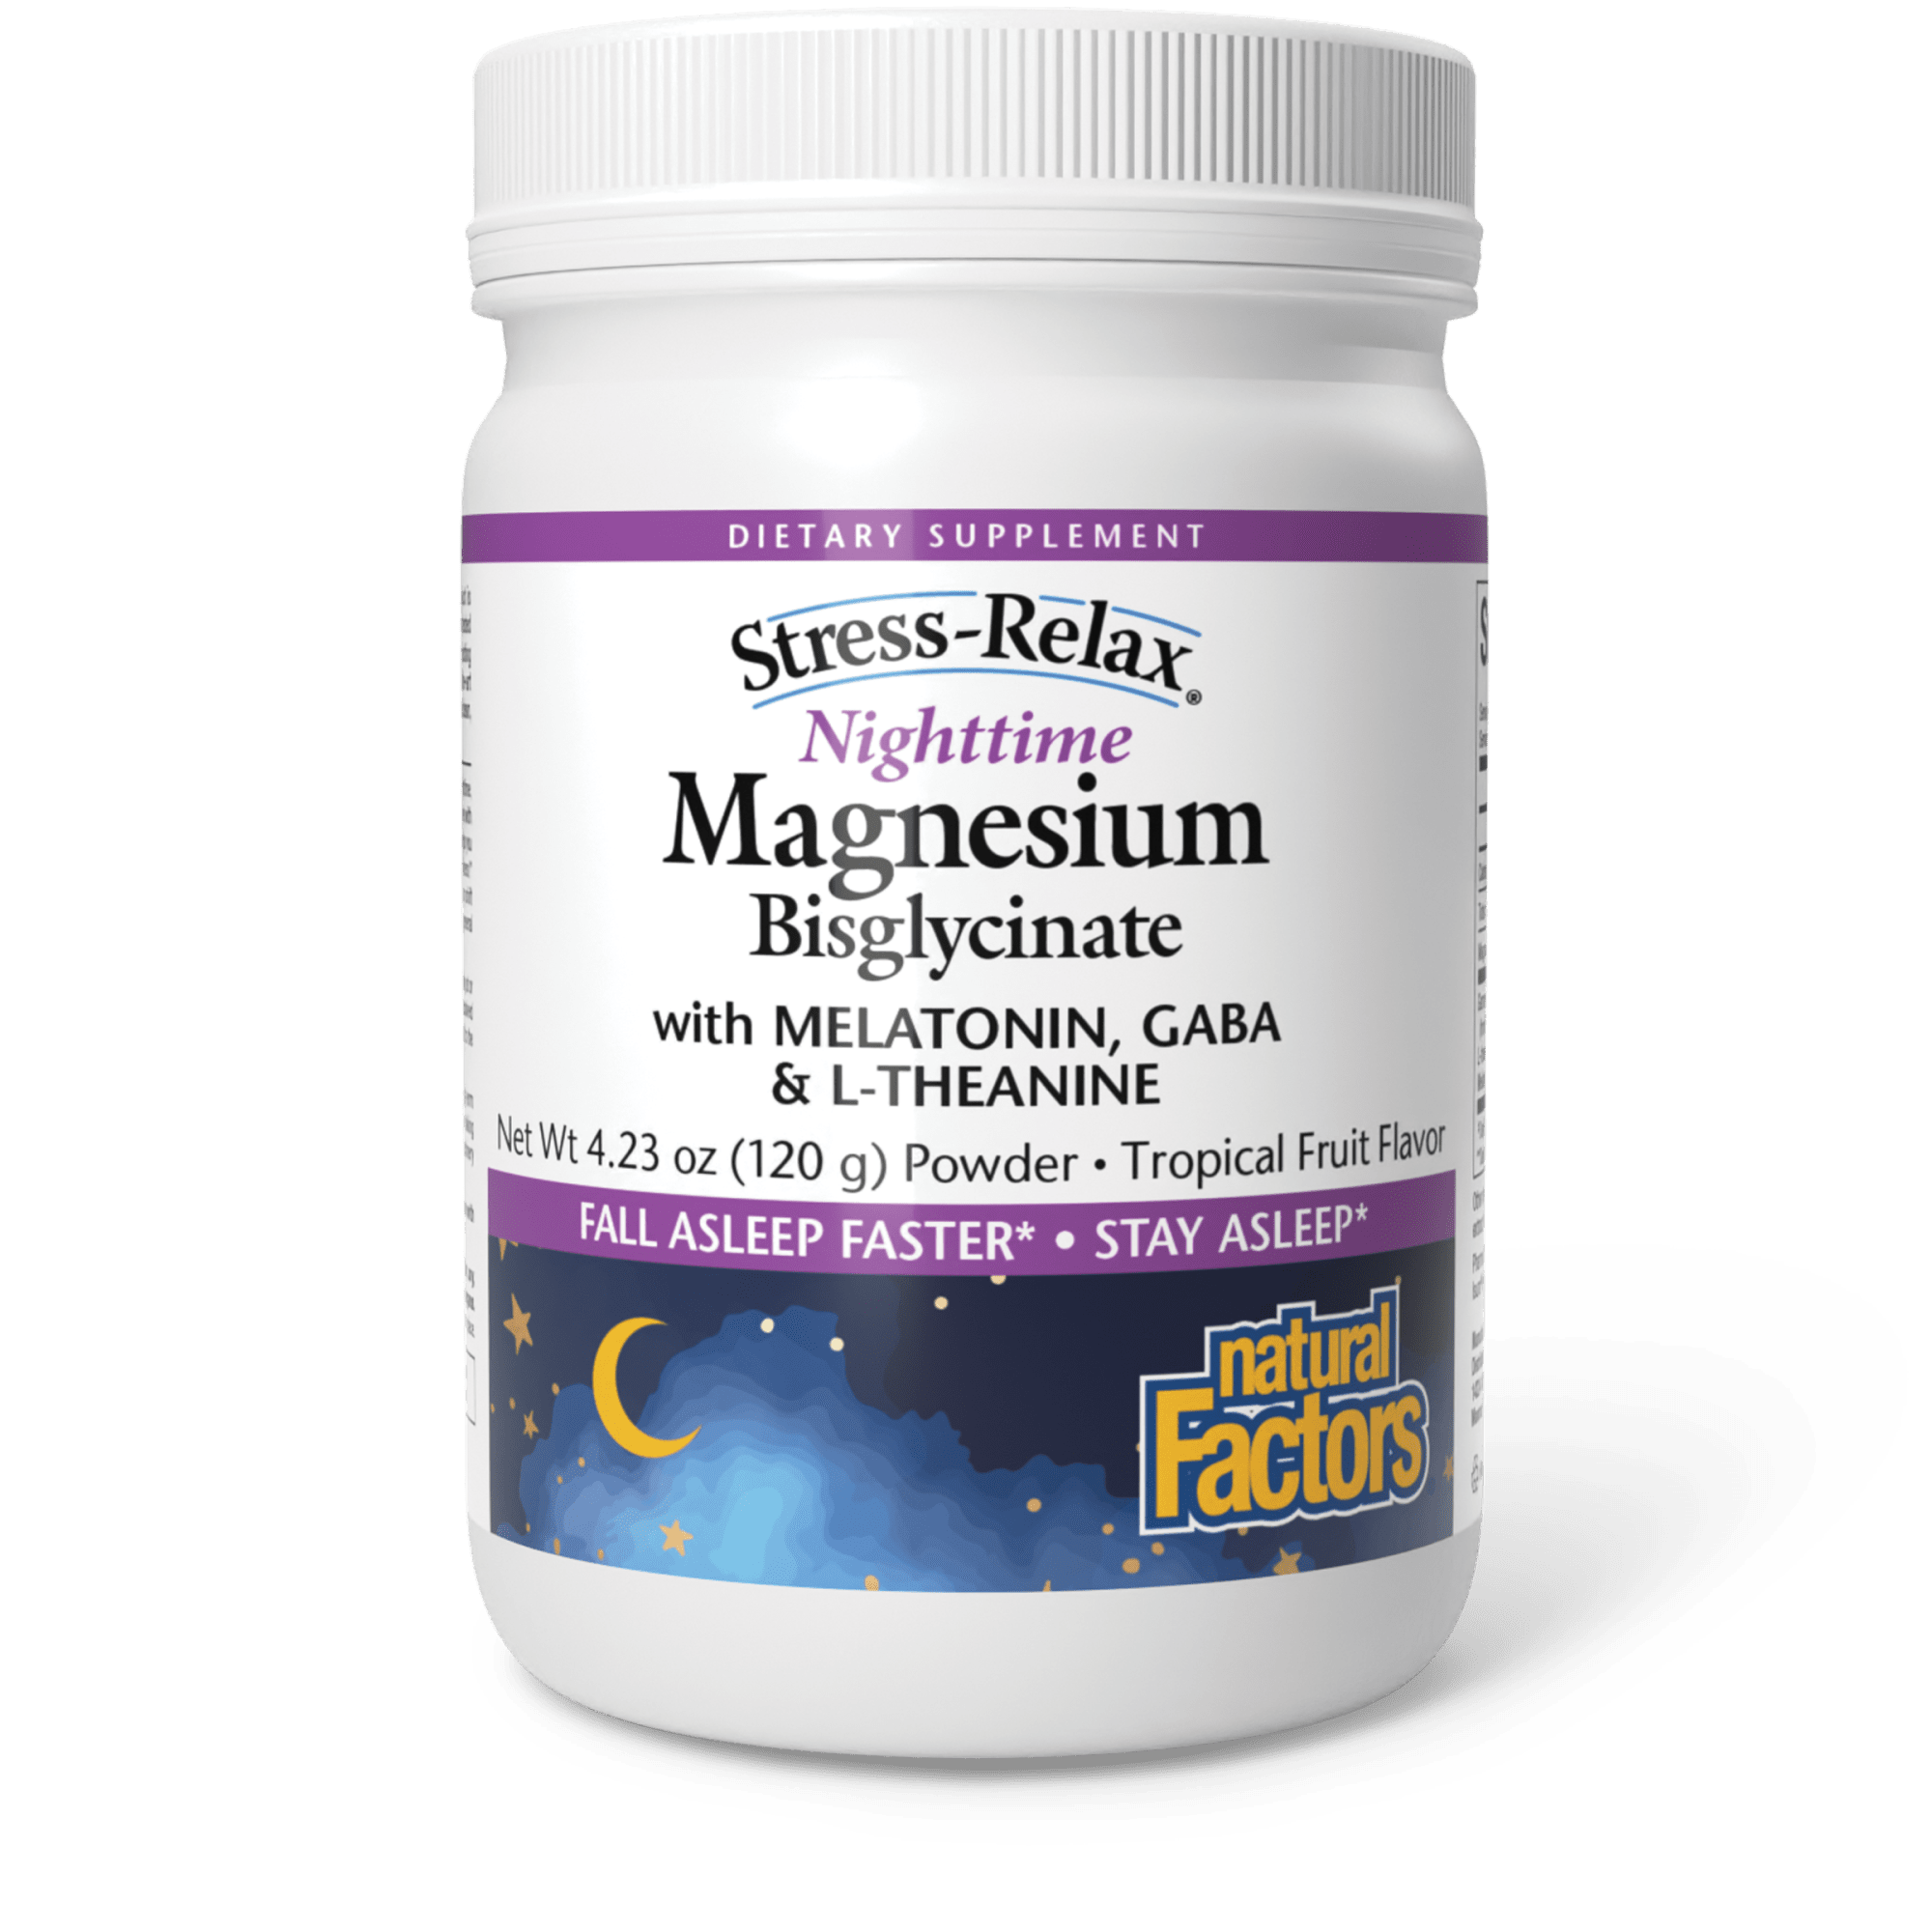 Stress Relax Nighttime Magnesium Bisglycinate